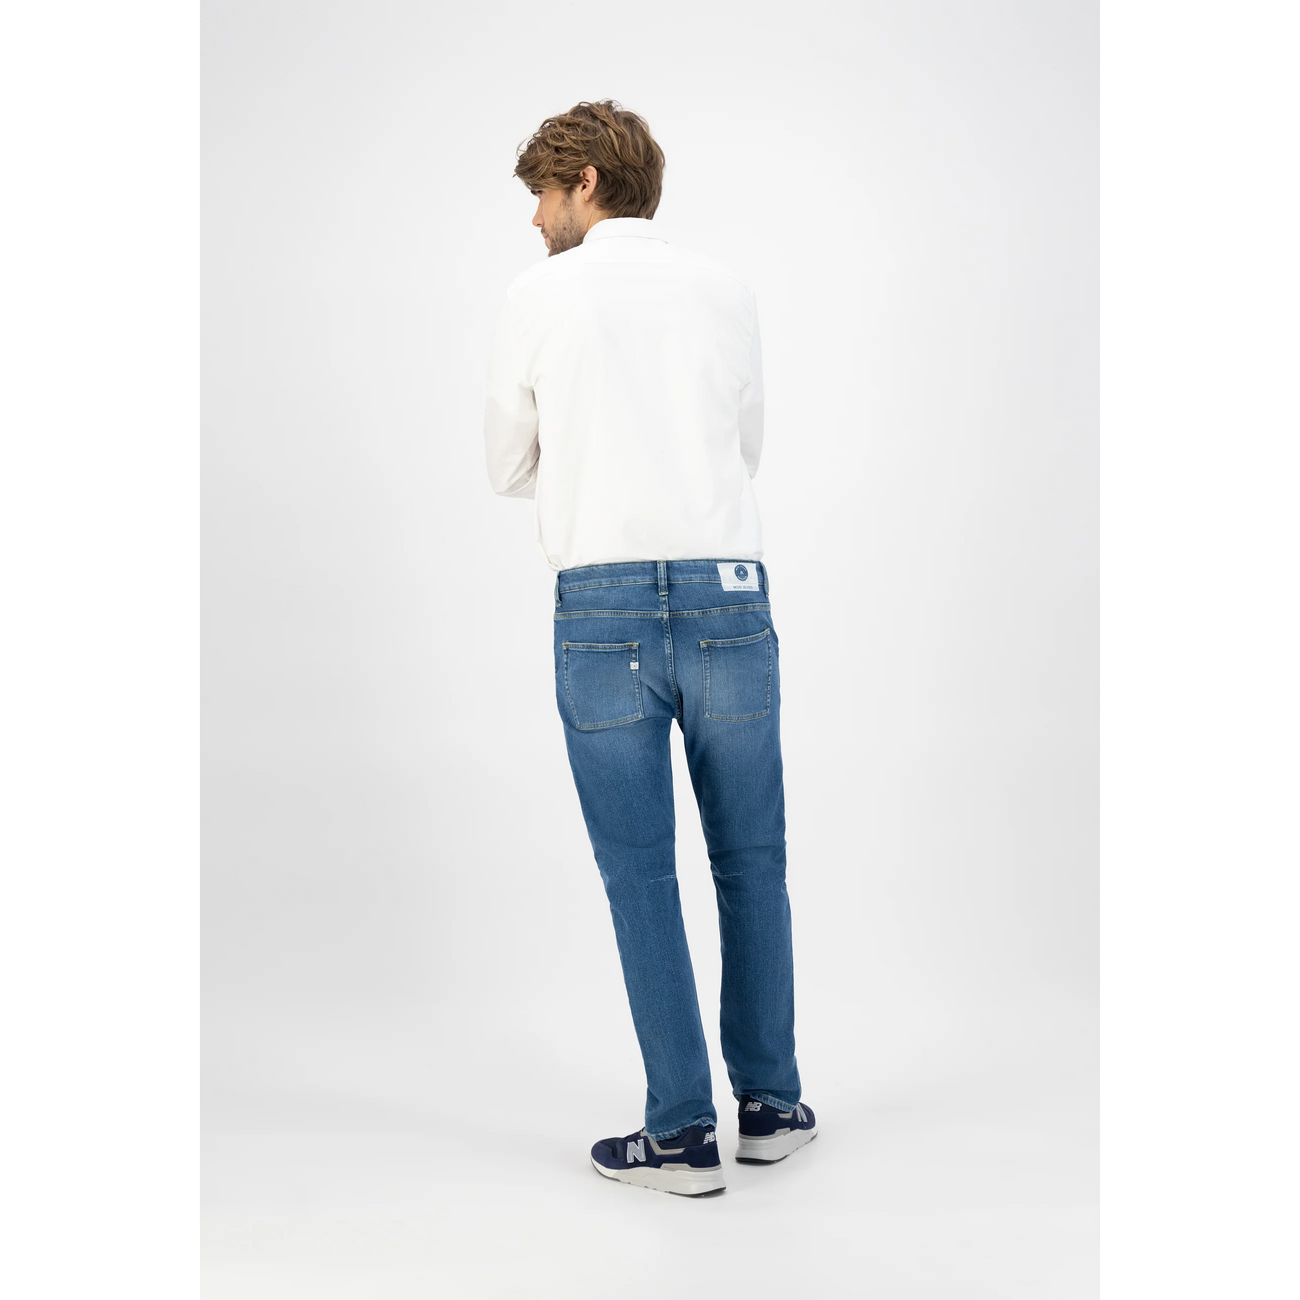 Load image into Gallery viewer, Mud Jeans Block Chino Slim Fit Tapered Stretch Jeans
